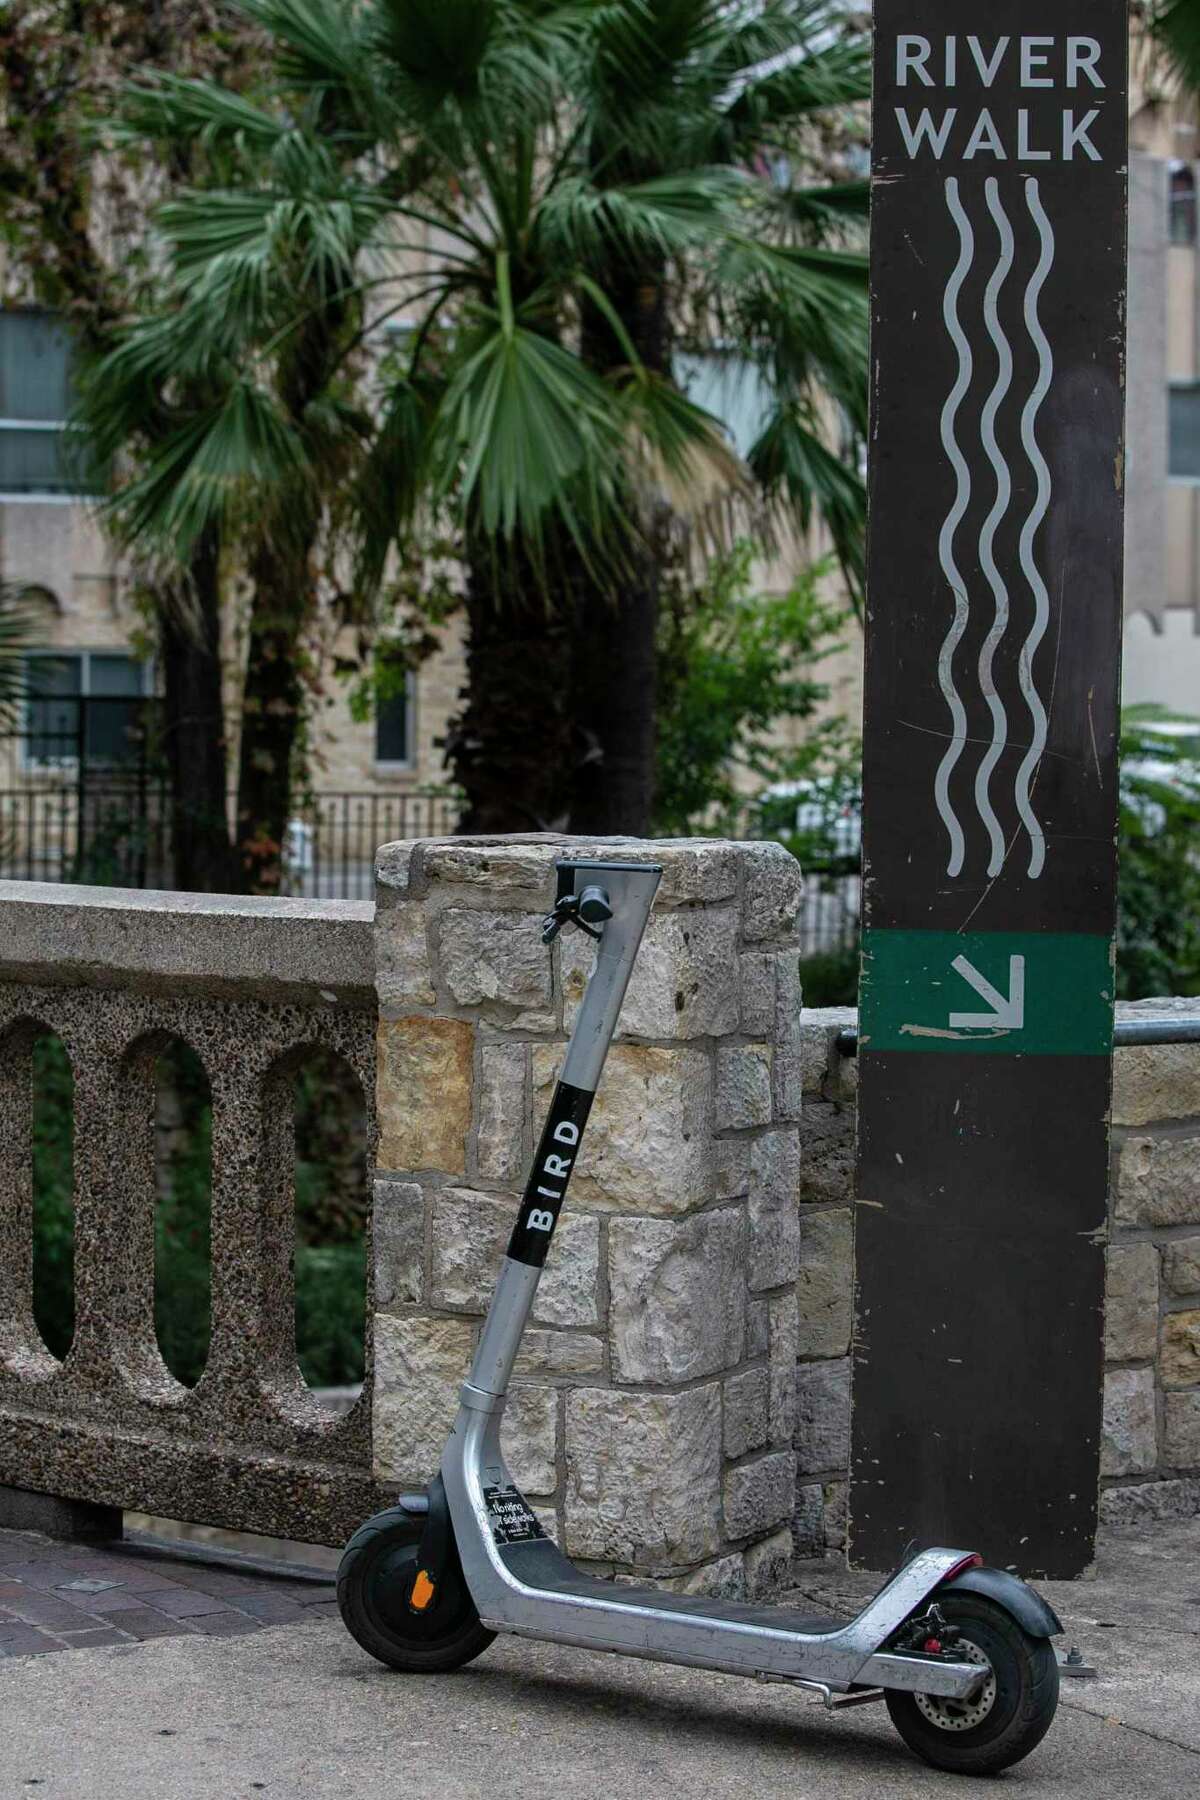 An electric Bird scooter is seen parked next to a South St. Mary’s Street in downtown San Antonio, Texas, on Nov. 24, 2021.